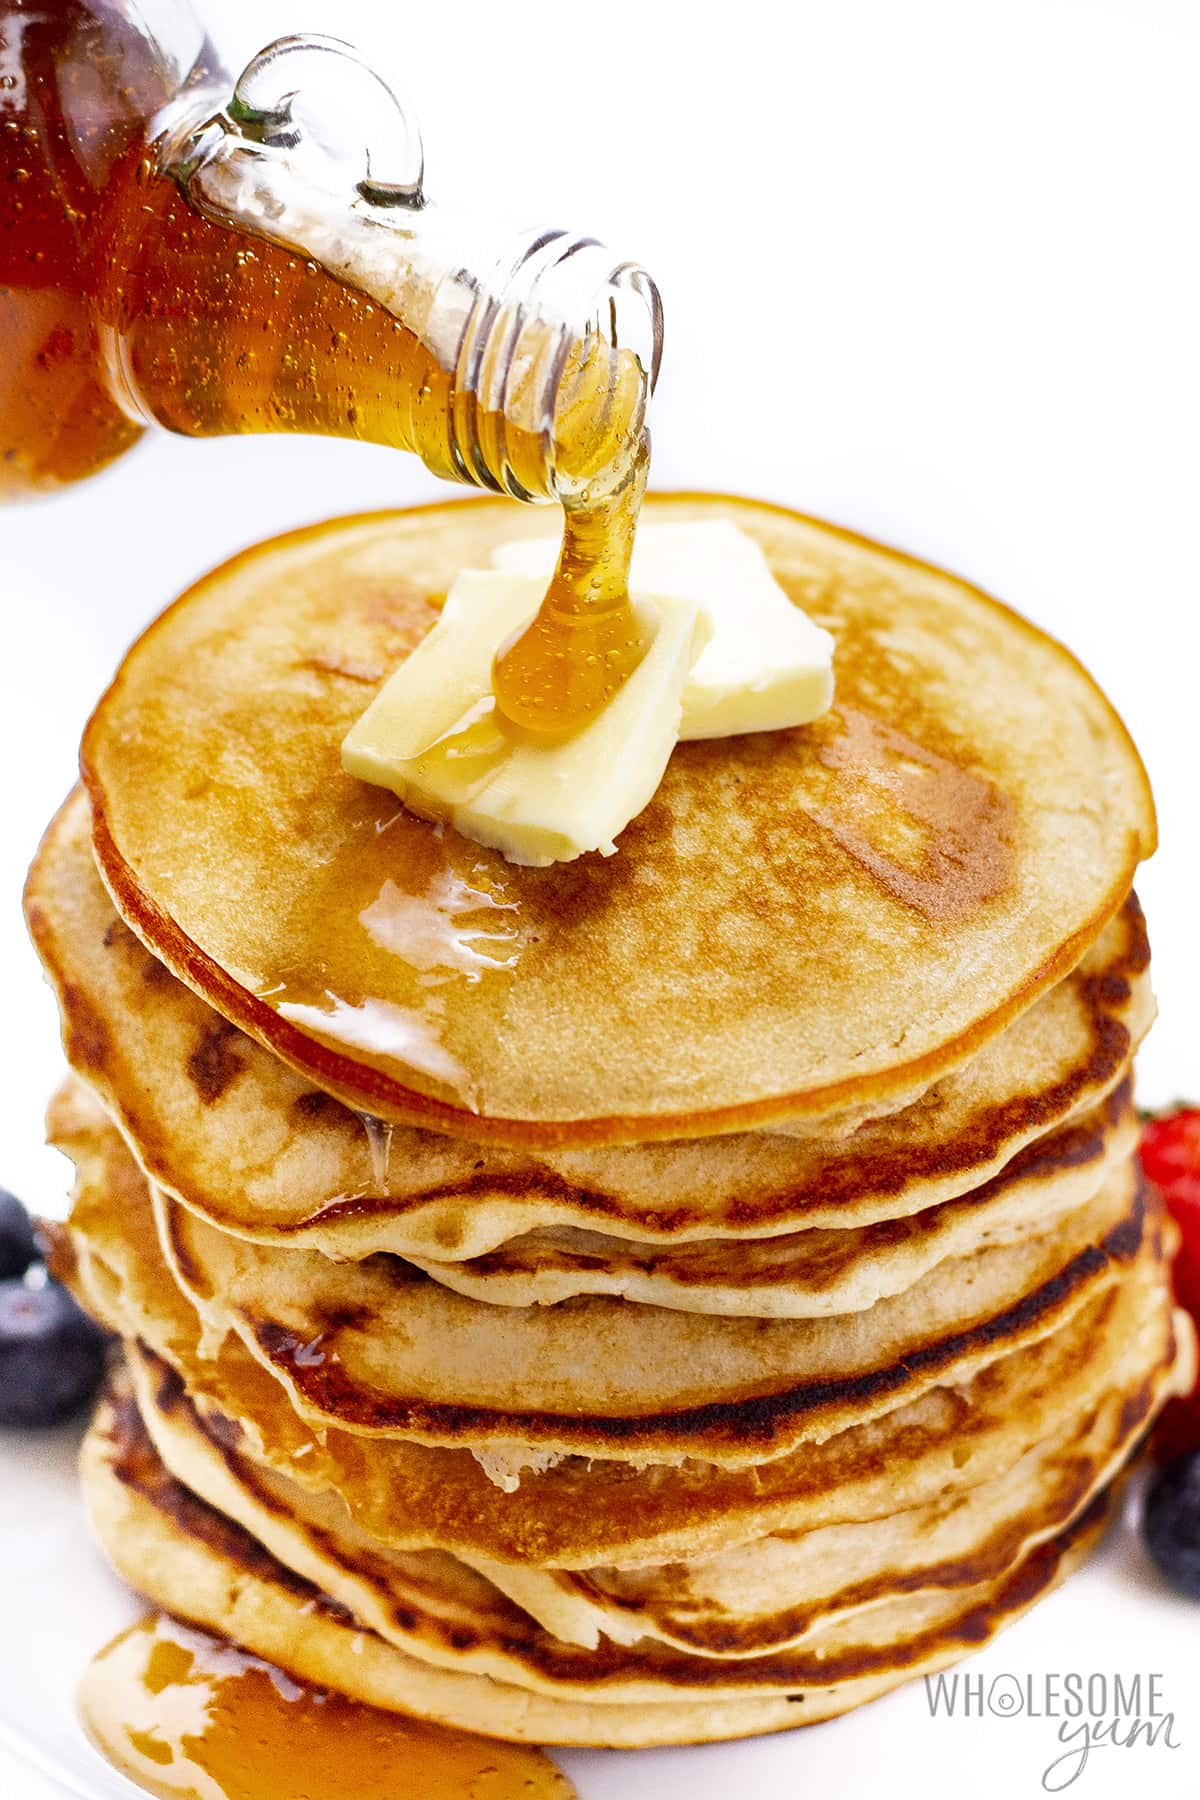 Pouring sugar free maple syrup over pancakes.